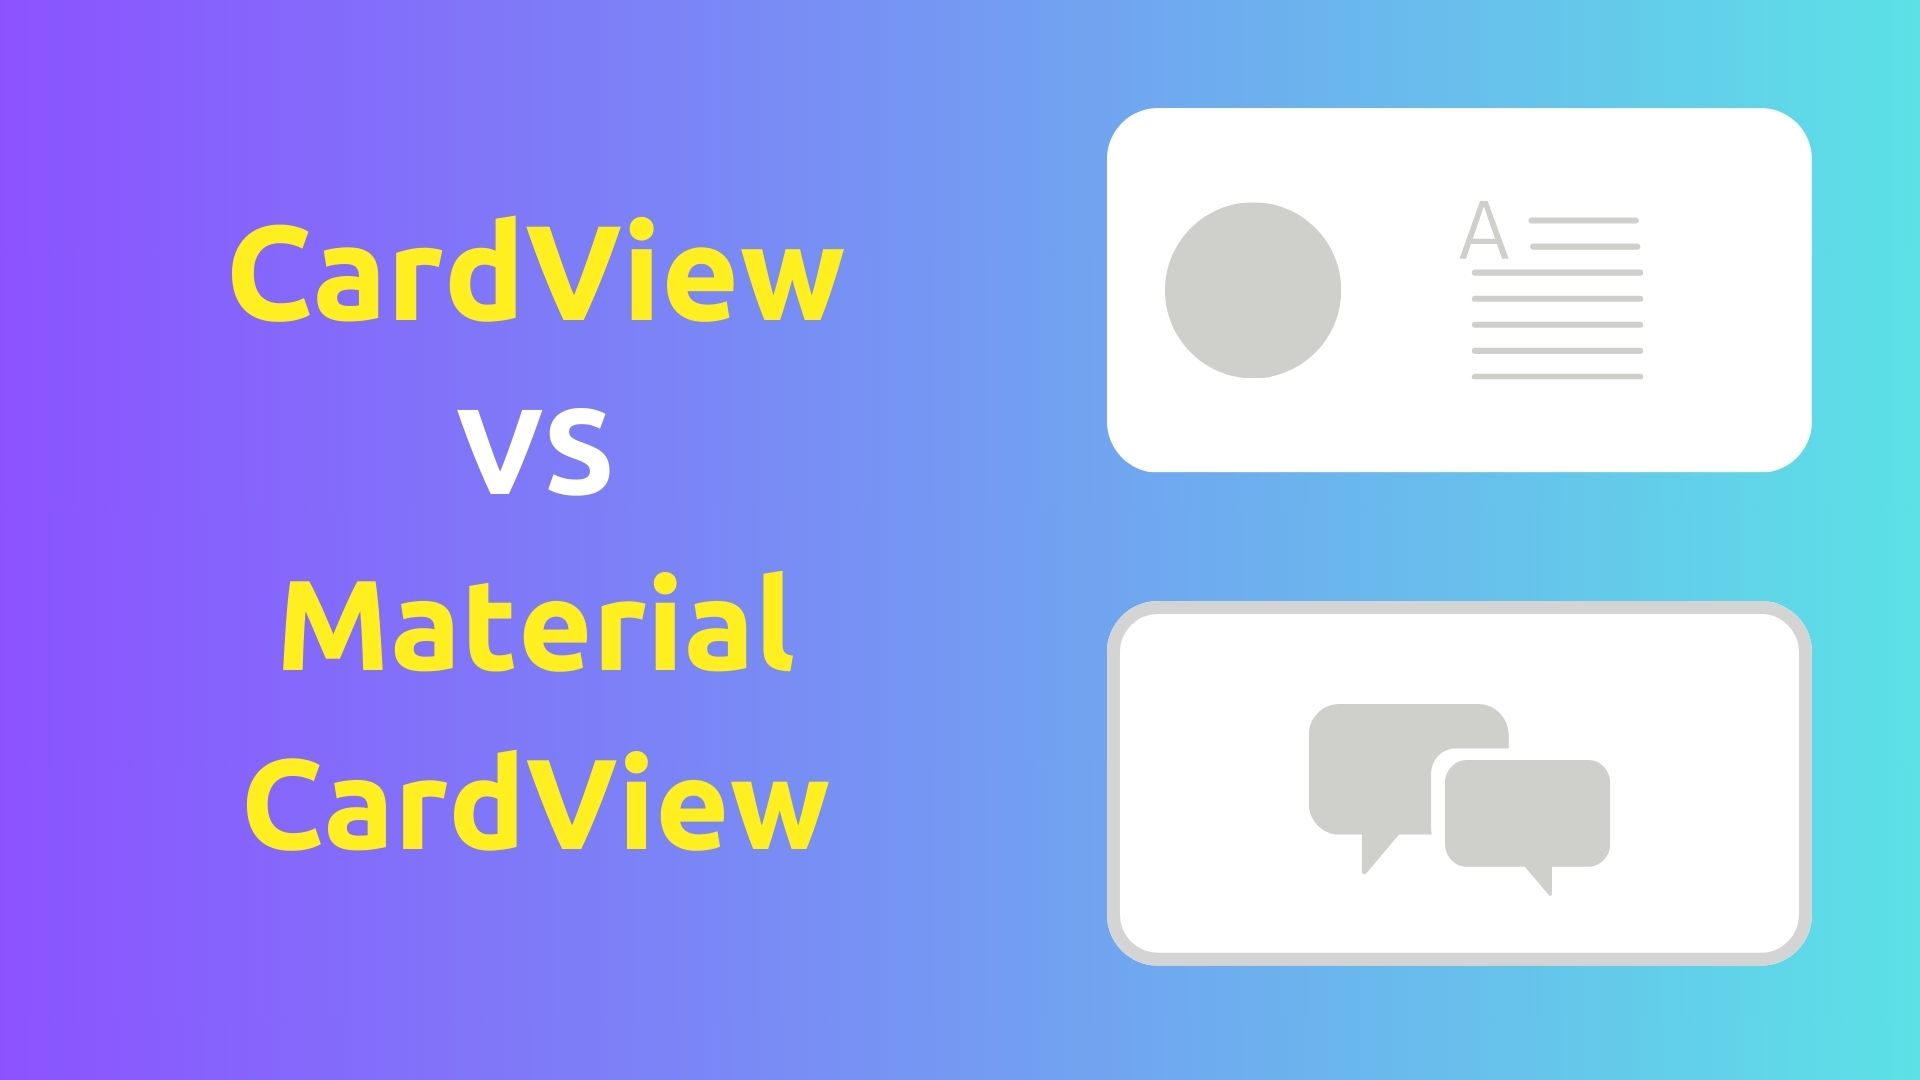 CardView vs Material CardView